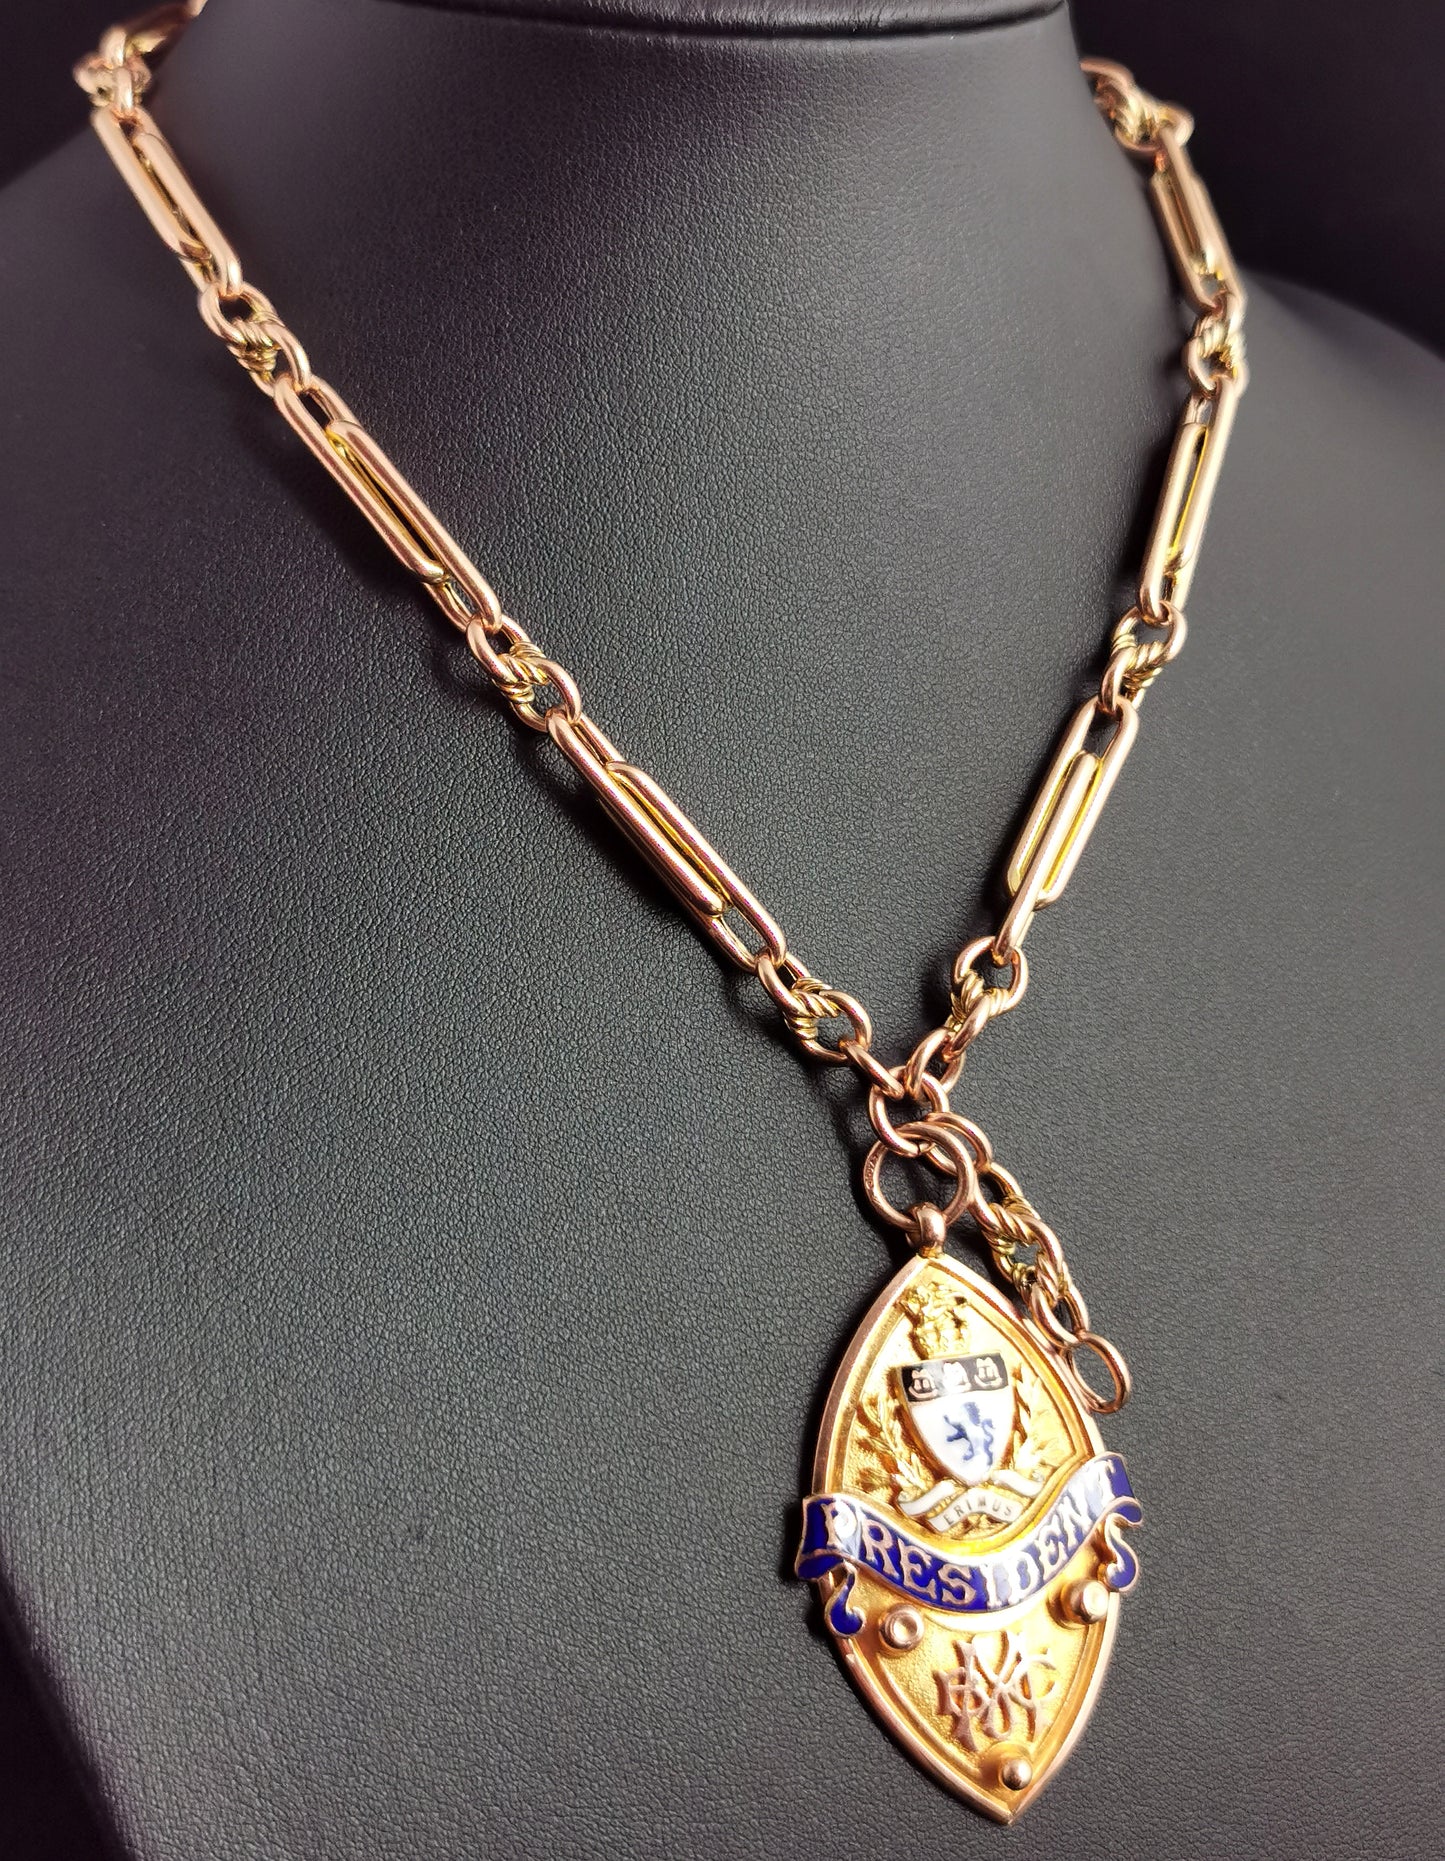 Antique 9ct gold Albert chain, watch chain, Enamelled fob